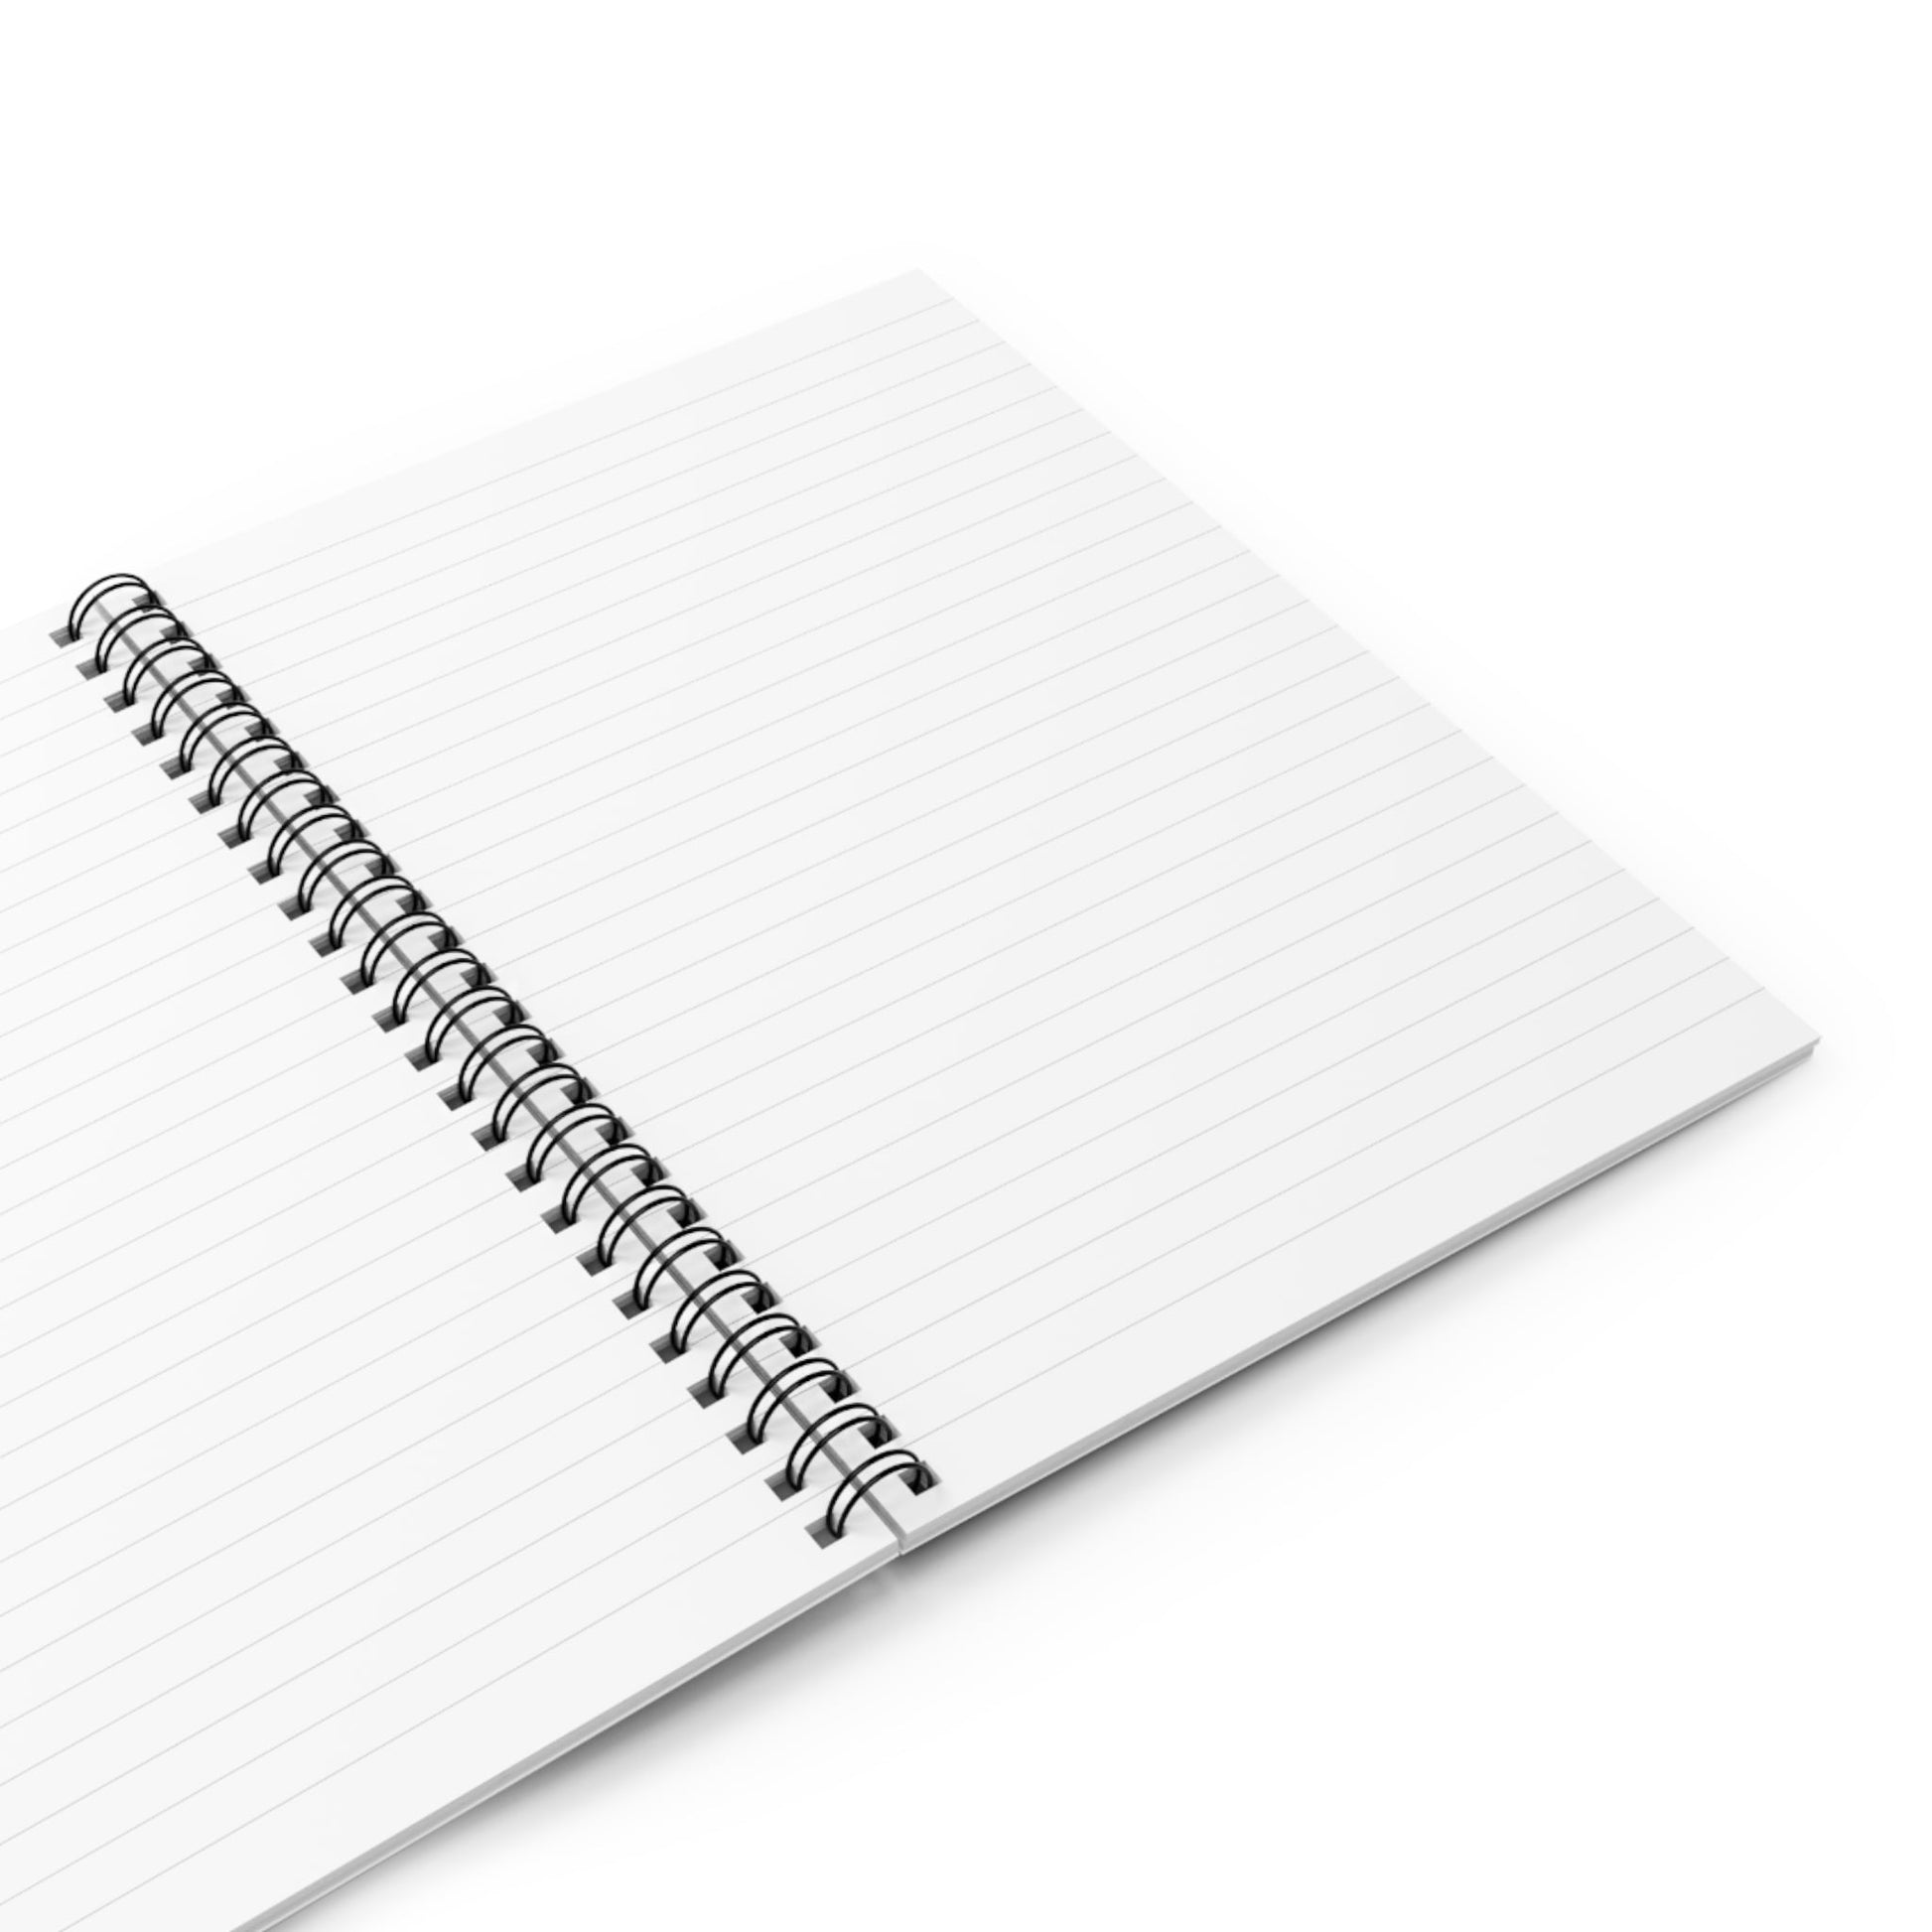 Spiral Notebook with Harvest Cover Opened with Blank White College Ruled Pages